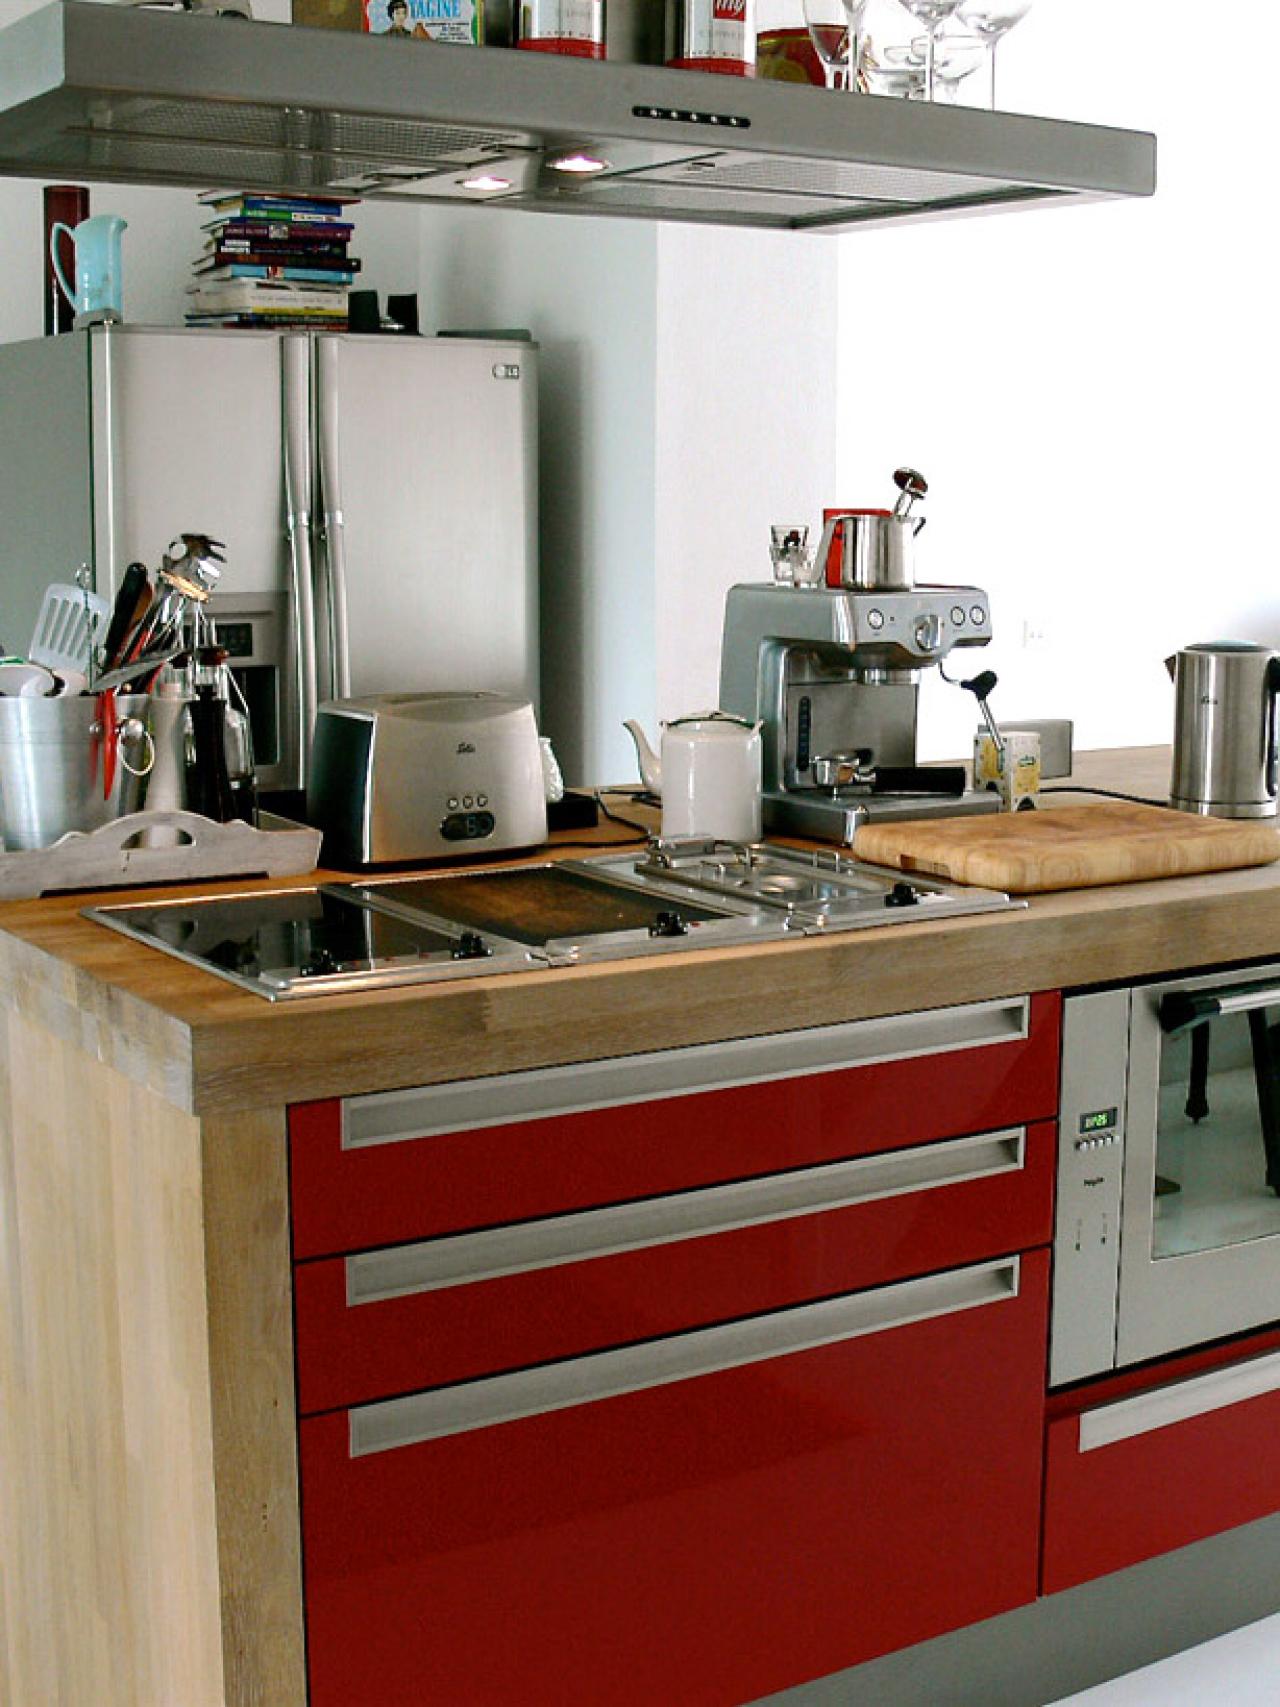 Small Kitchen Appliances Pictures, Ideas & Tips From HGTV   HGTV